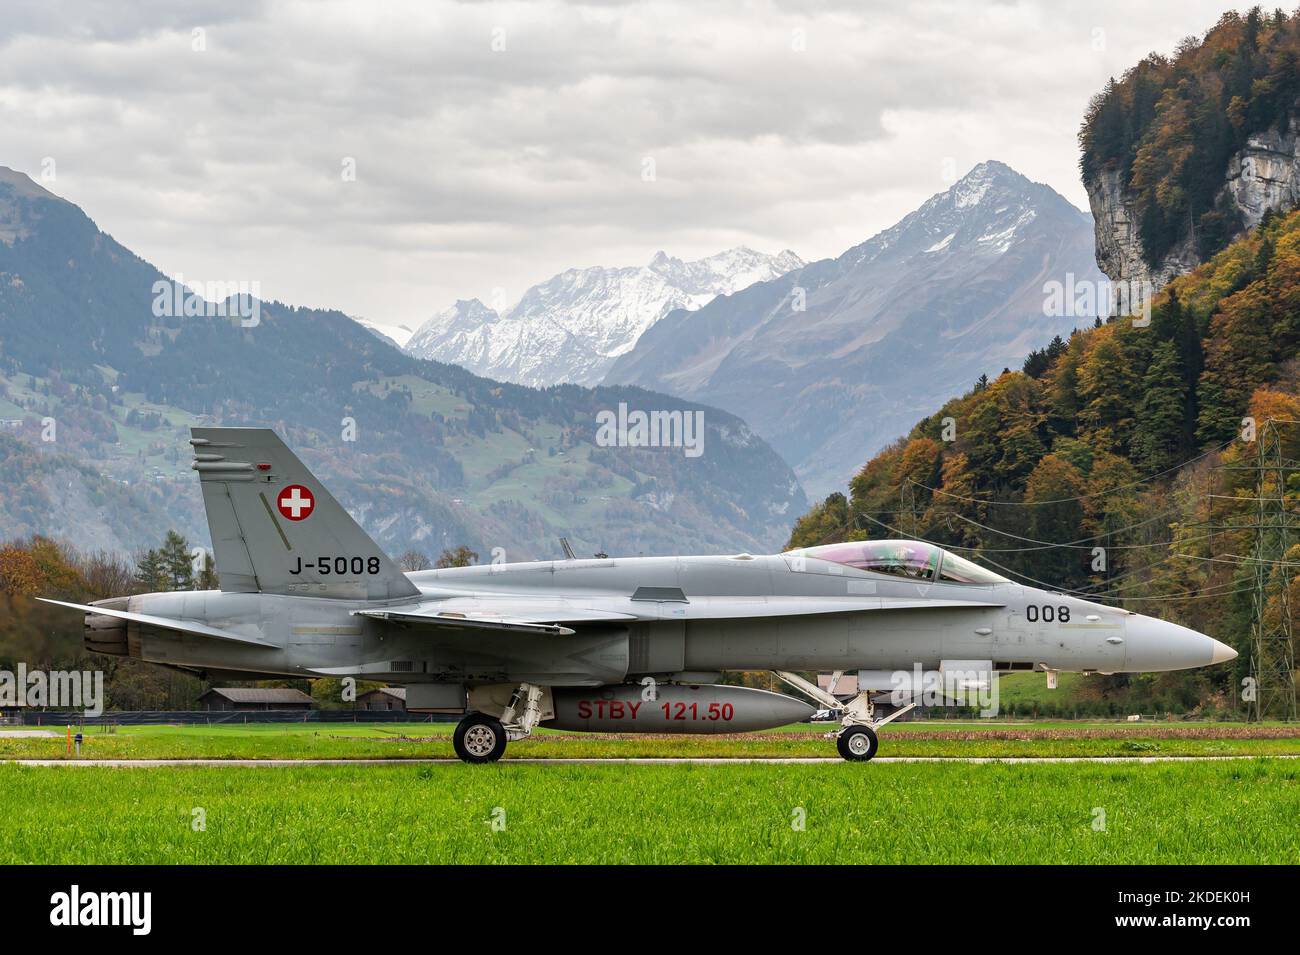 A McDonnell Douglas F/A-18 Hornet supersonic multirole combat aircraft of the Swiss Air Force at the Swiss Alps. Stock Photo